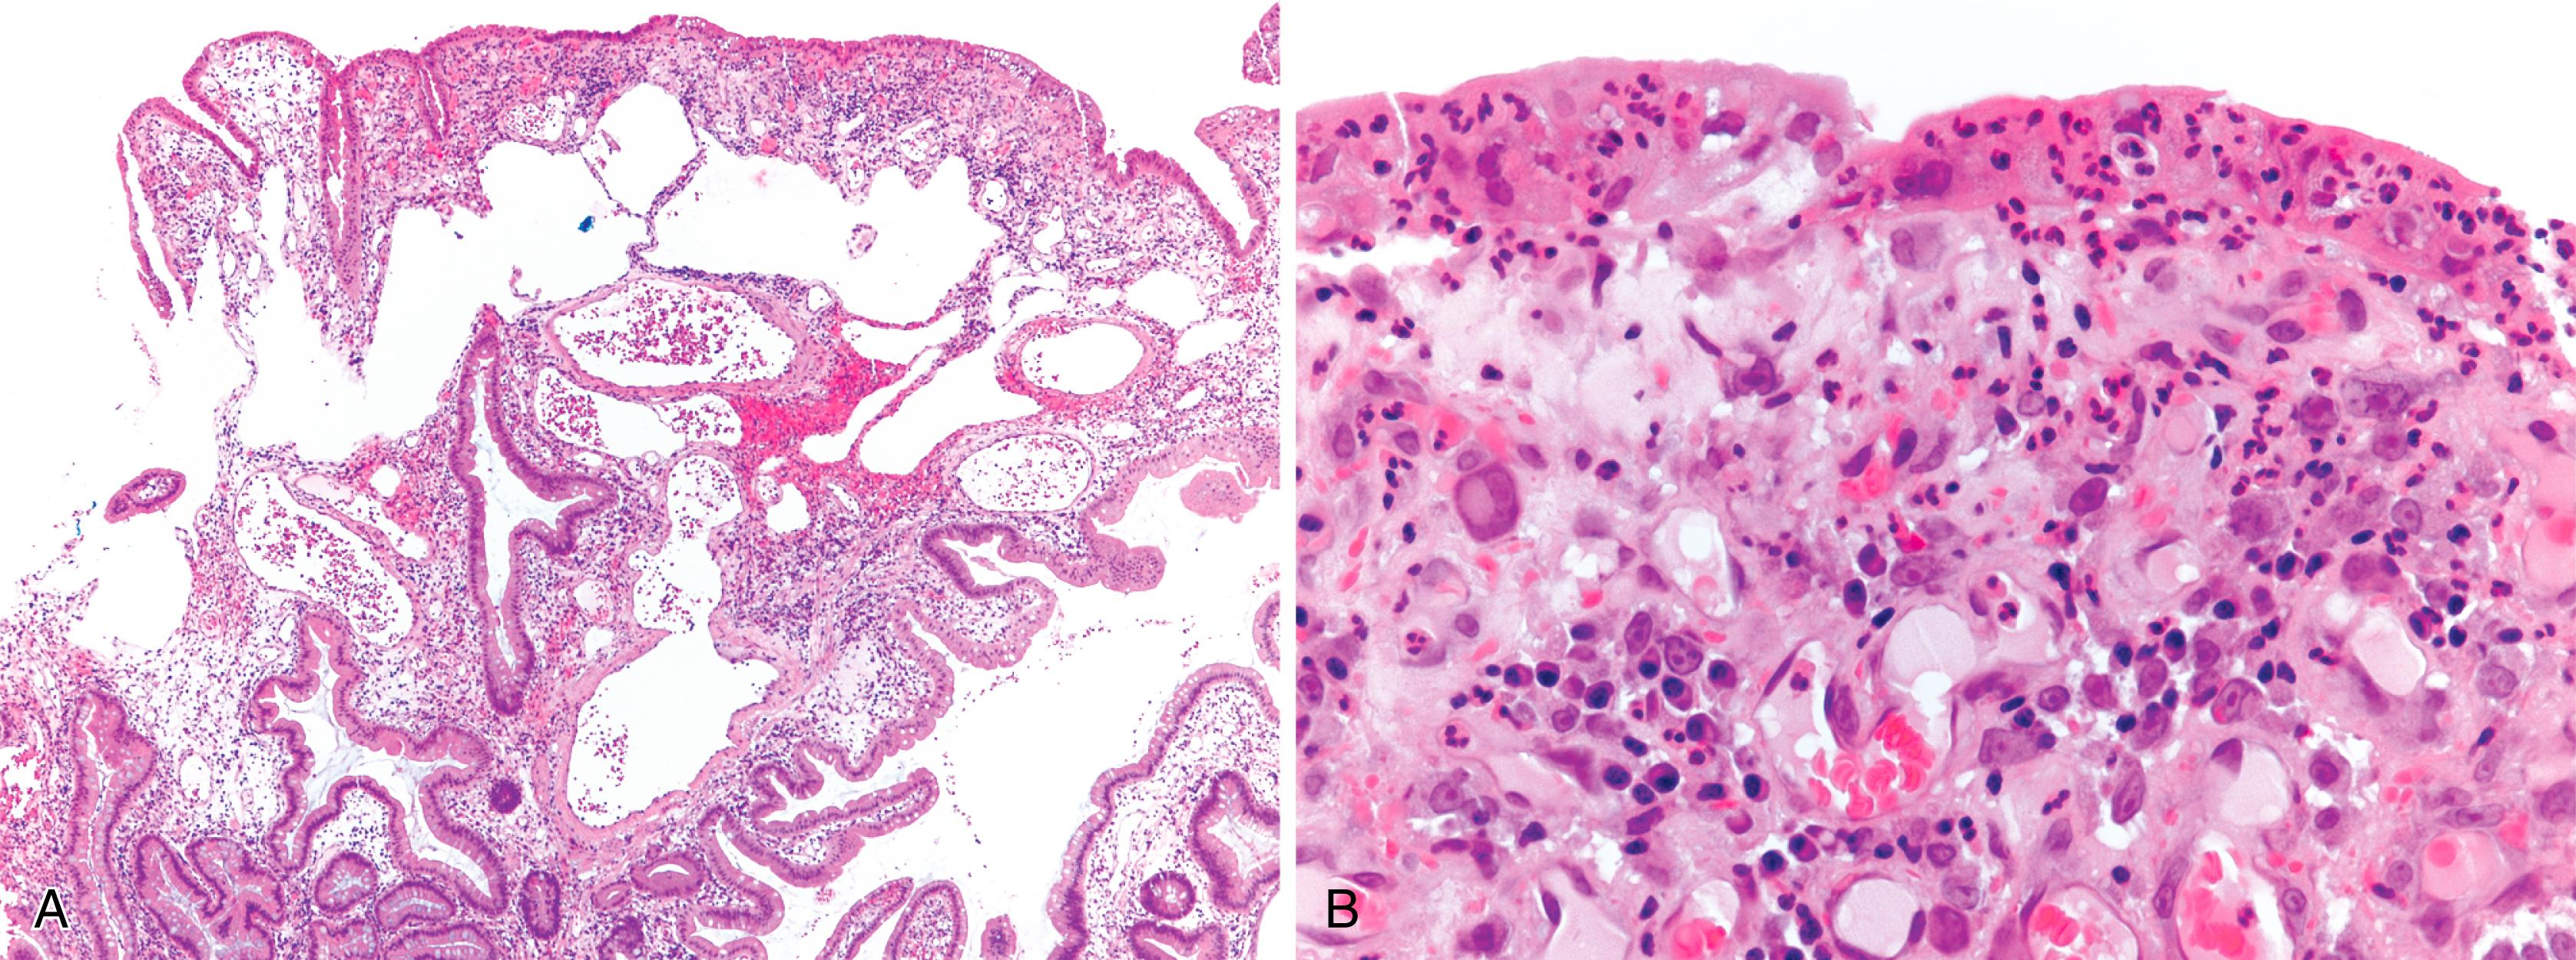 FIGURE 21.2, Cytomegalovirus-associated inflammatory polyp. A, This isolated inflammatory polyp has an expanded and edematous lamina propria with vascular ectasia. B, Numerous cytomegaloviral inclusions are identified.